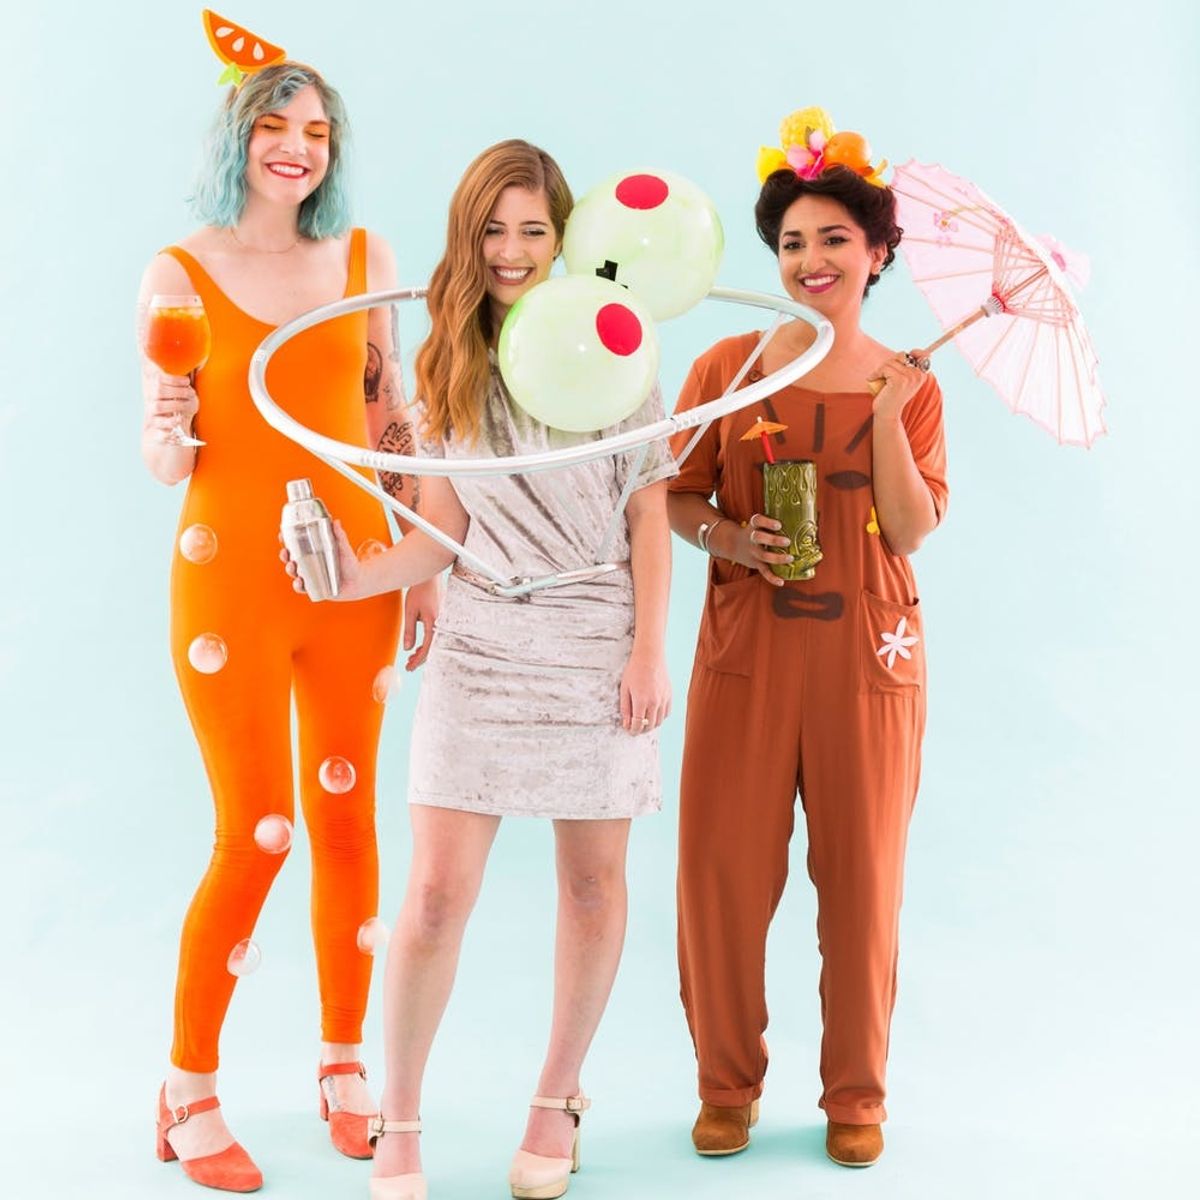 Get Your Drank on in These DIY Cocktail Party Halloween Costumes